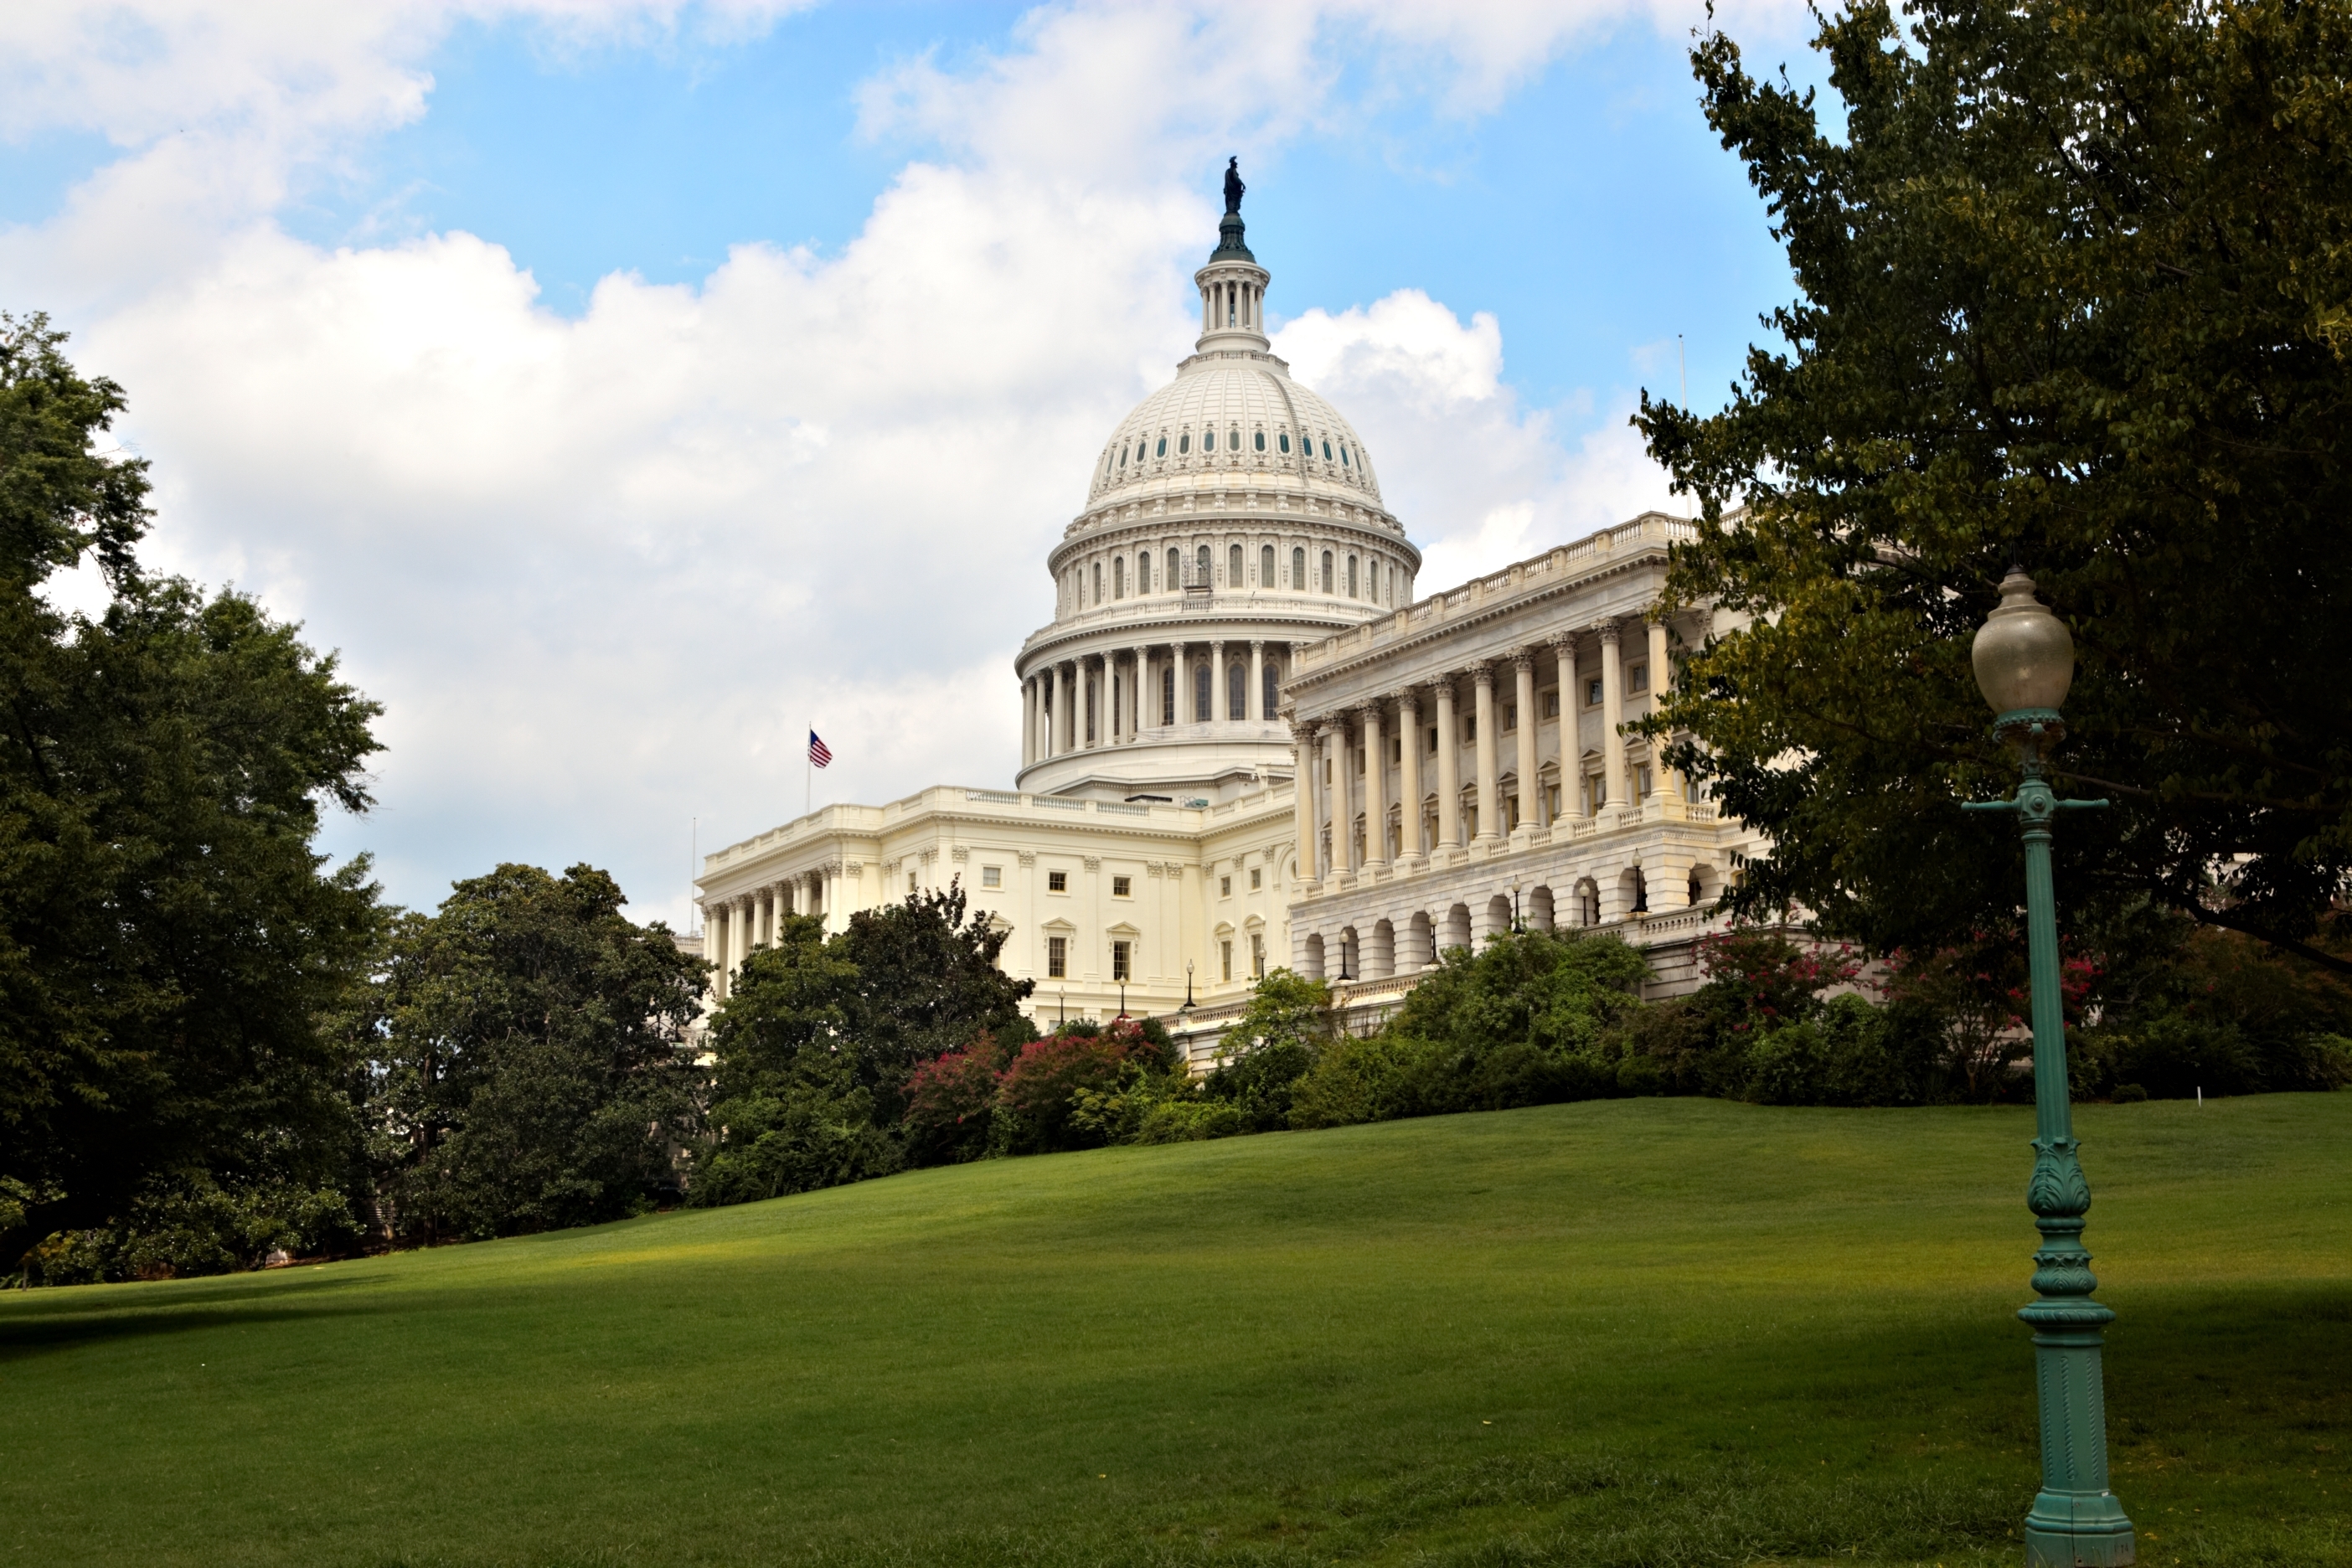 The U.S. Capitol building, a white domed structure featuring columns, against a cloudy blue sky and beyond green grass and trees.